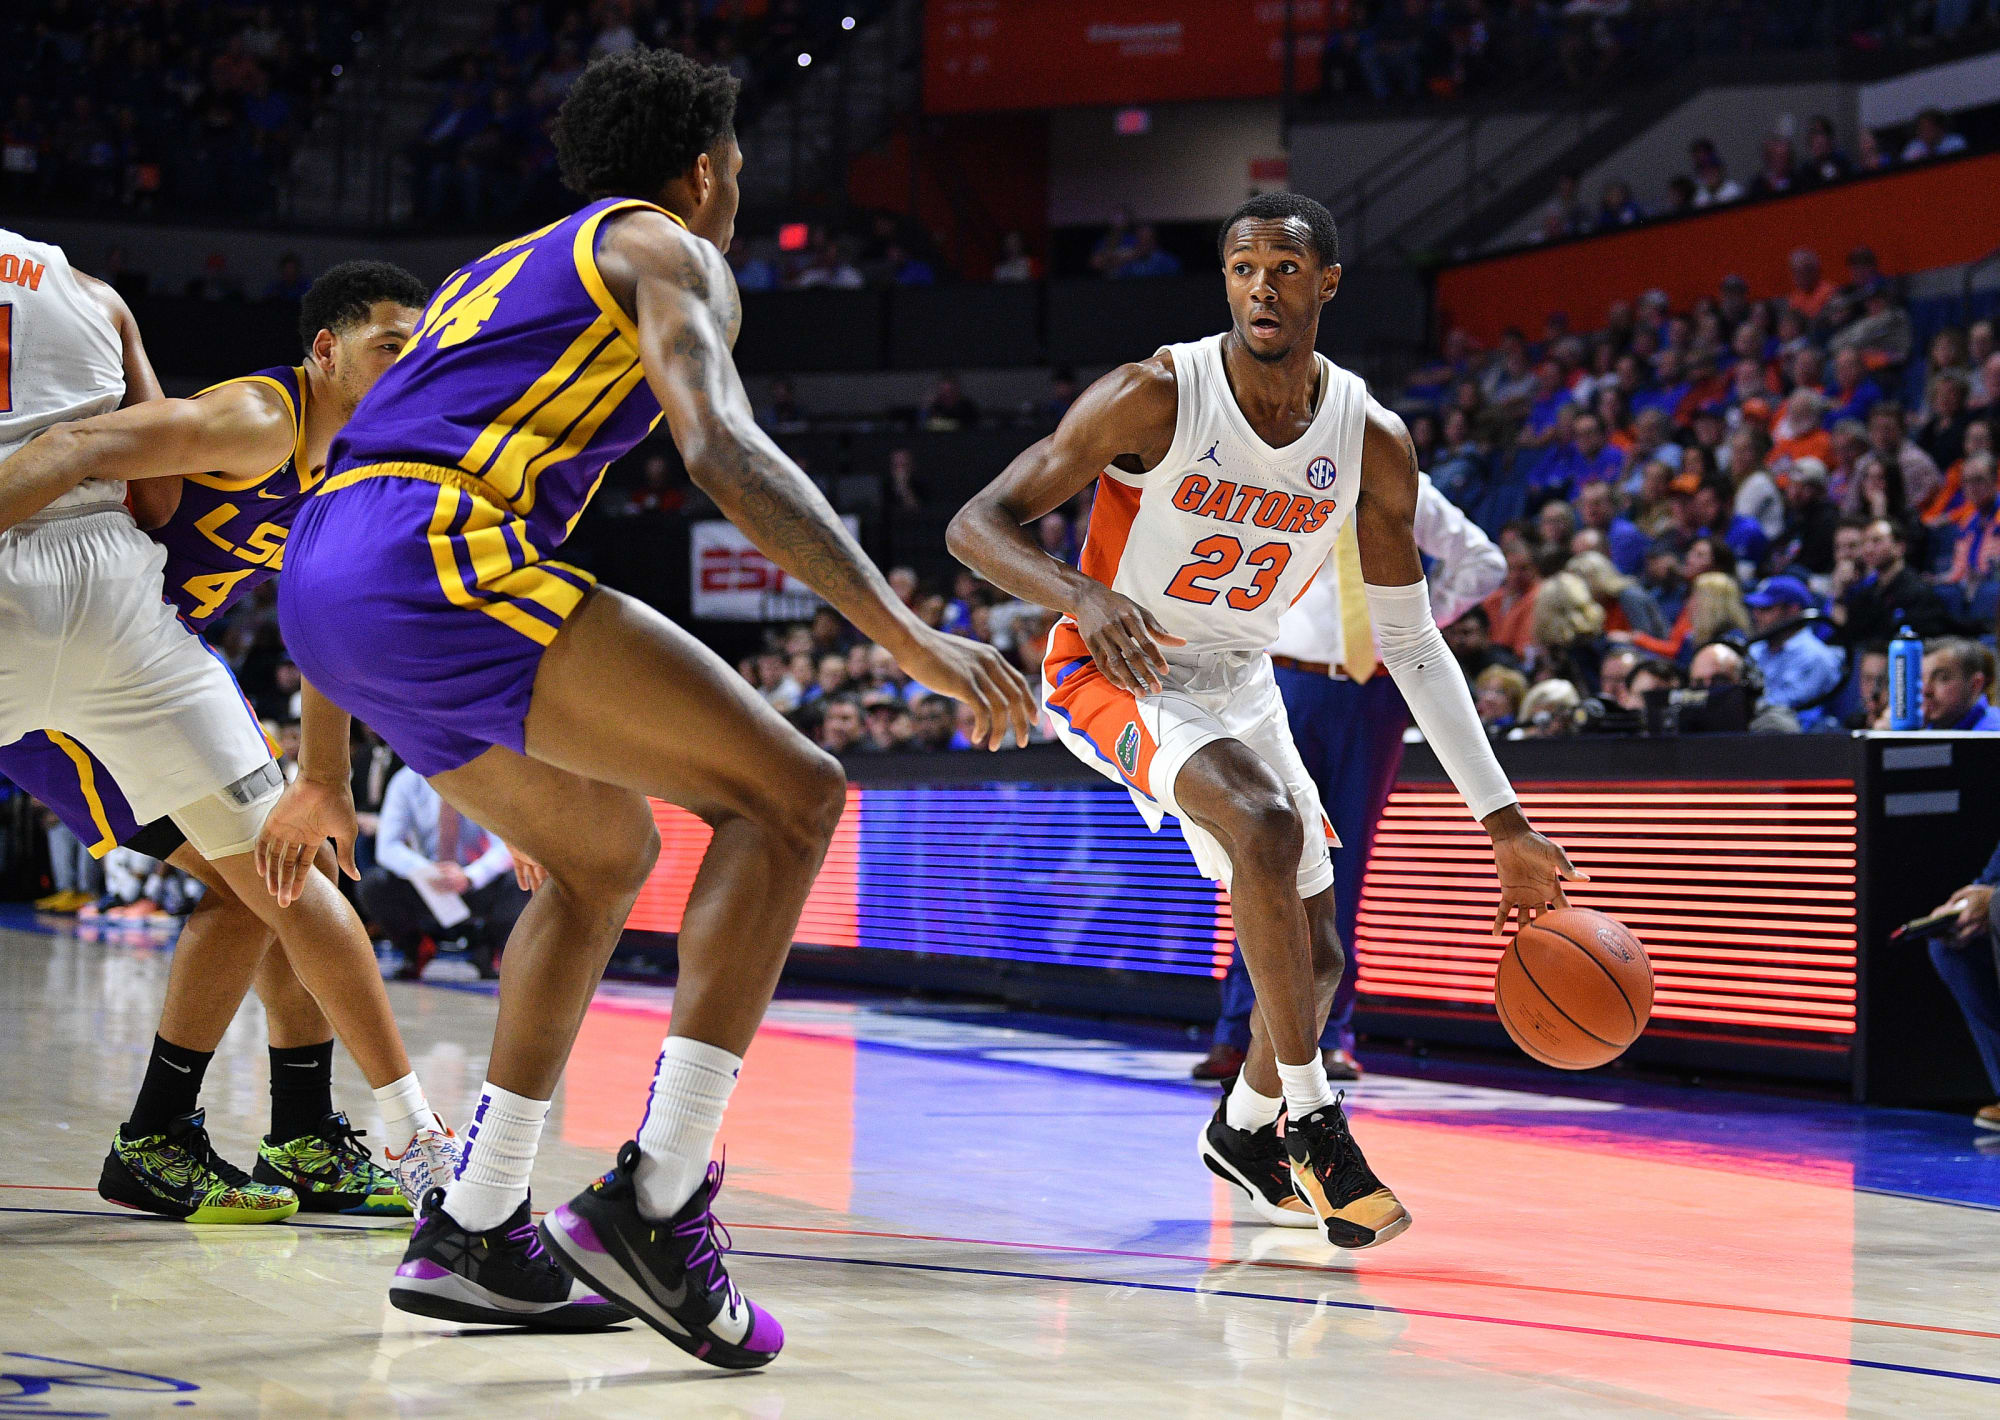 Florida basketball Scottie Lewis returning to Gators is a good thing